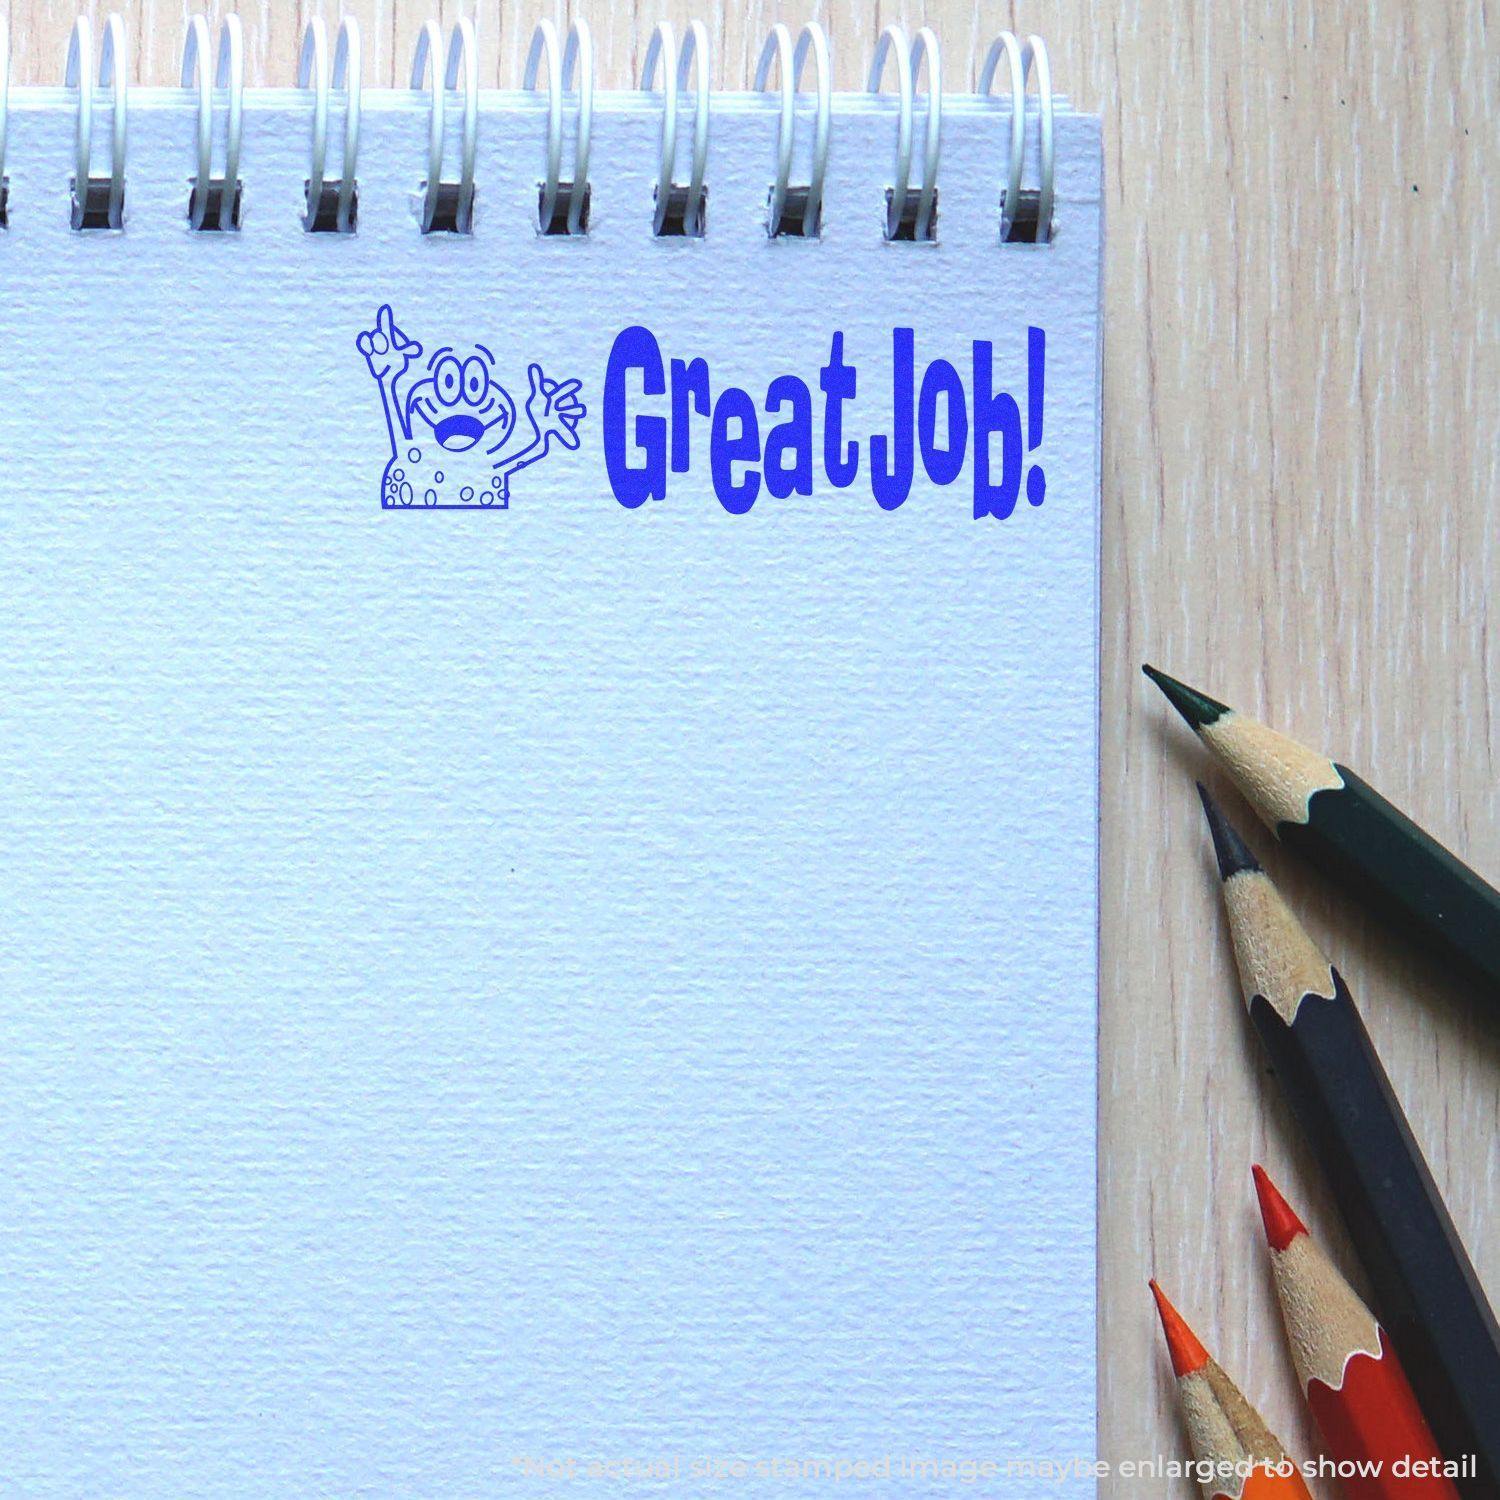 A self-inking stamp with a stamped image showing how the text "Great Job!" with an image of a frog with its hand up in the air is displayed after stamping.